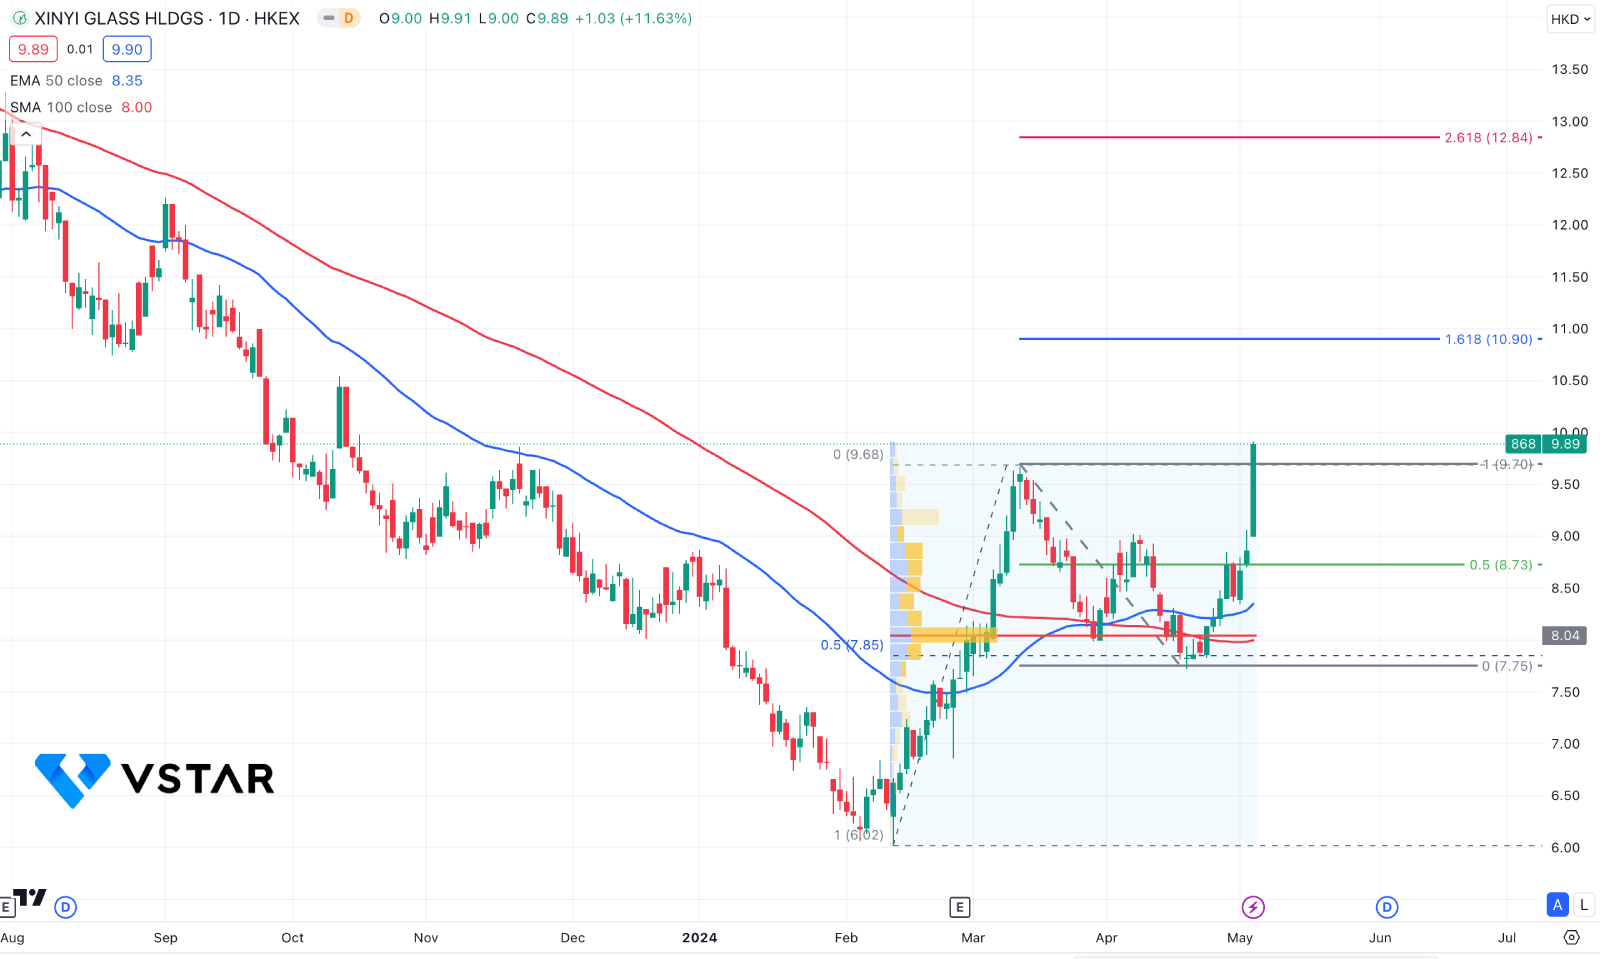 Is Xinyi Glass (XINYI) A Buy After The Recent Range Breakout?